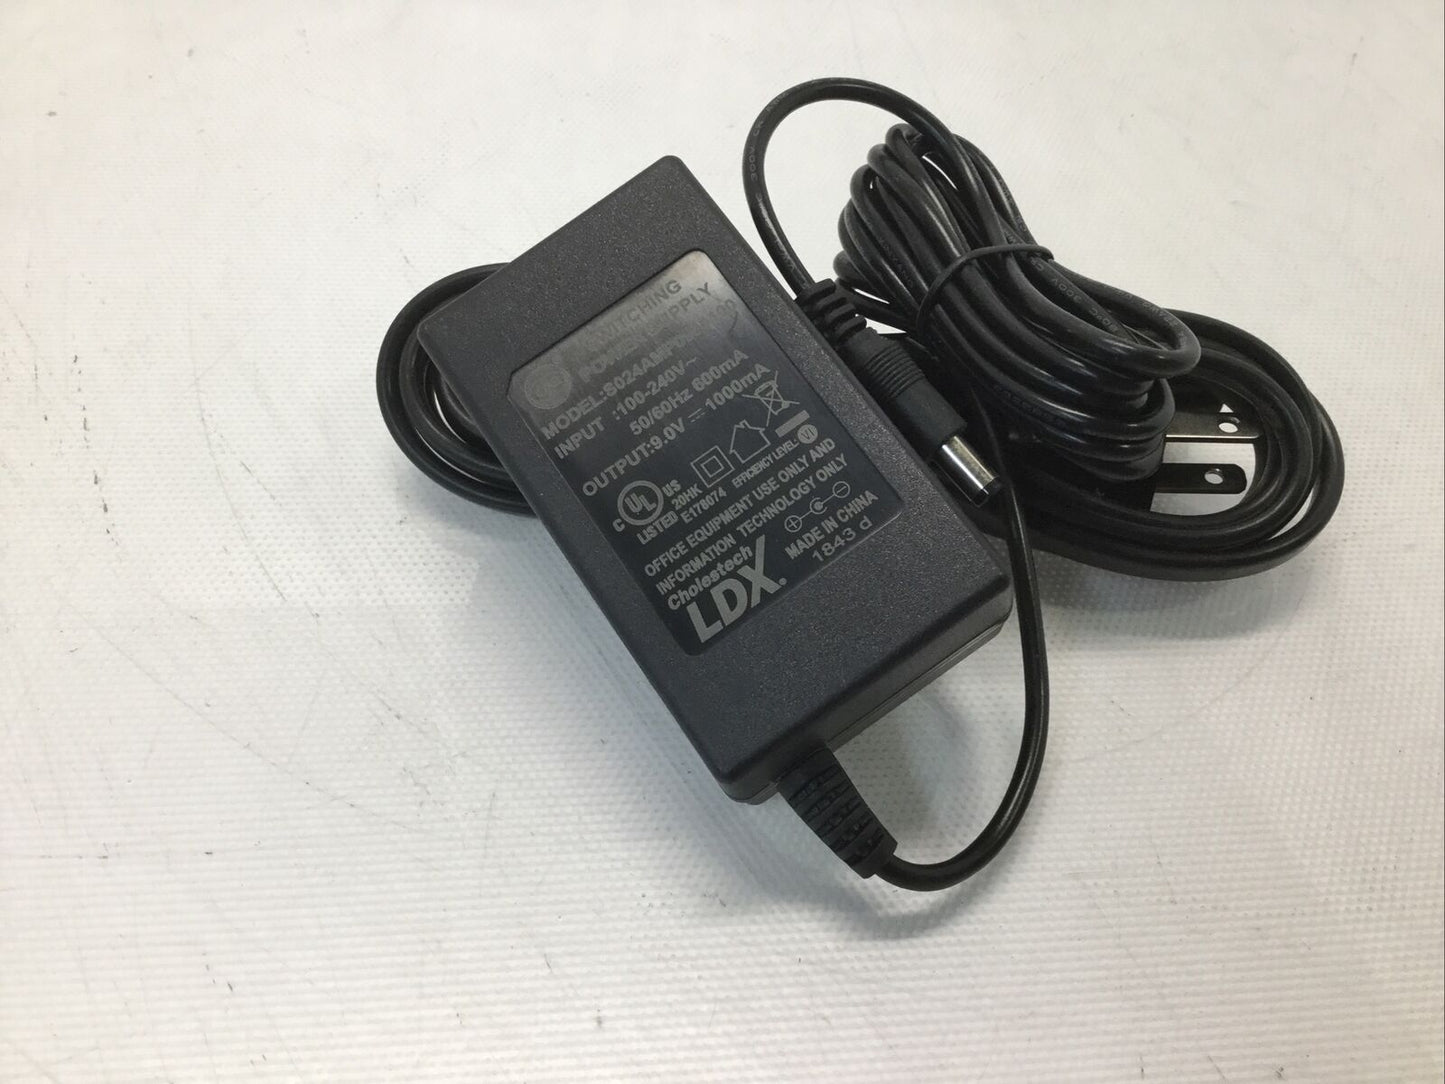 (10) Cholestech LDX Switching Power Supply 9.0V 1A AC Adapter S024AMP0900100